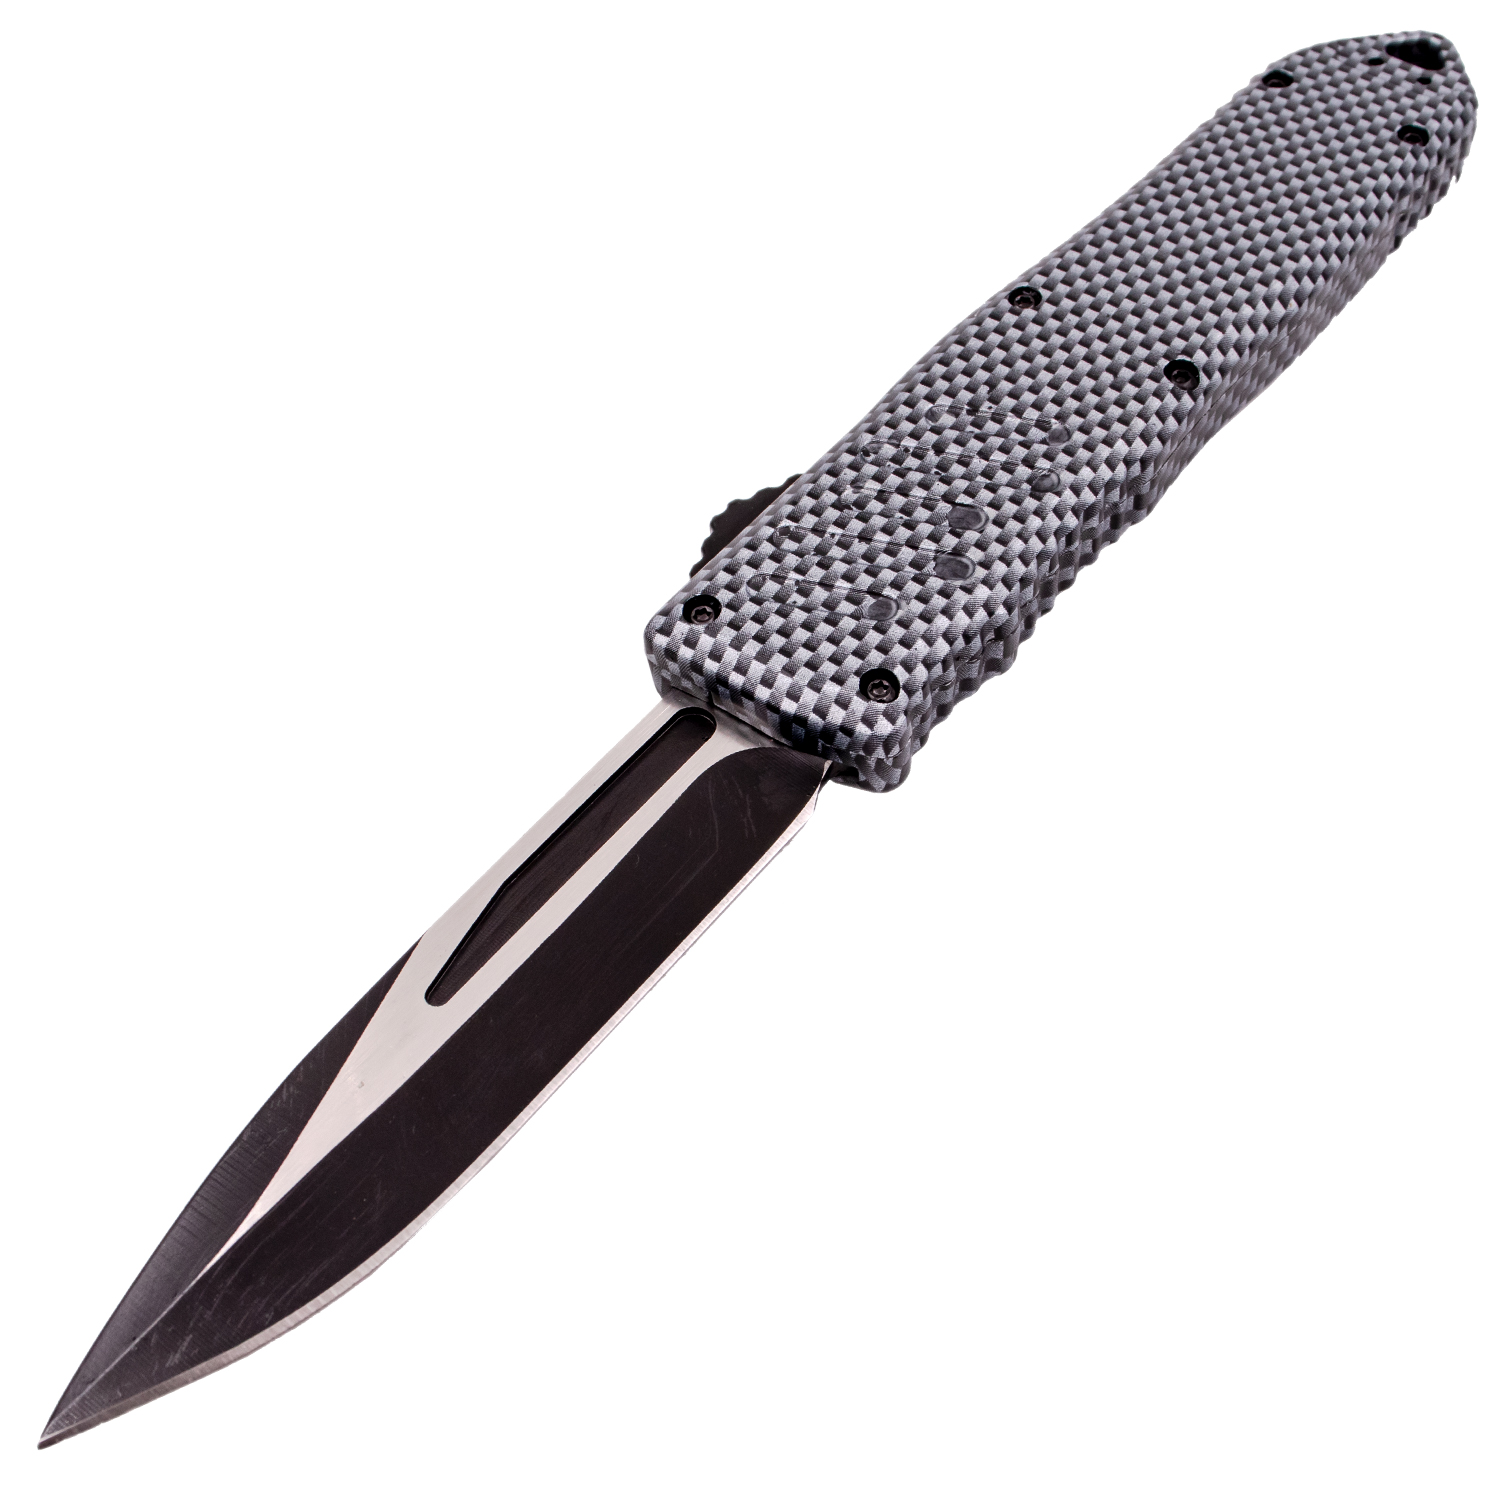 Covert OPS USA OTF Automatic Knife 9 inch Overall D2 Steel Blade DP Carbon Fiber